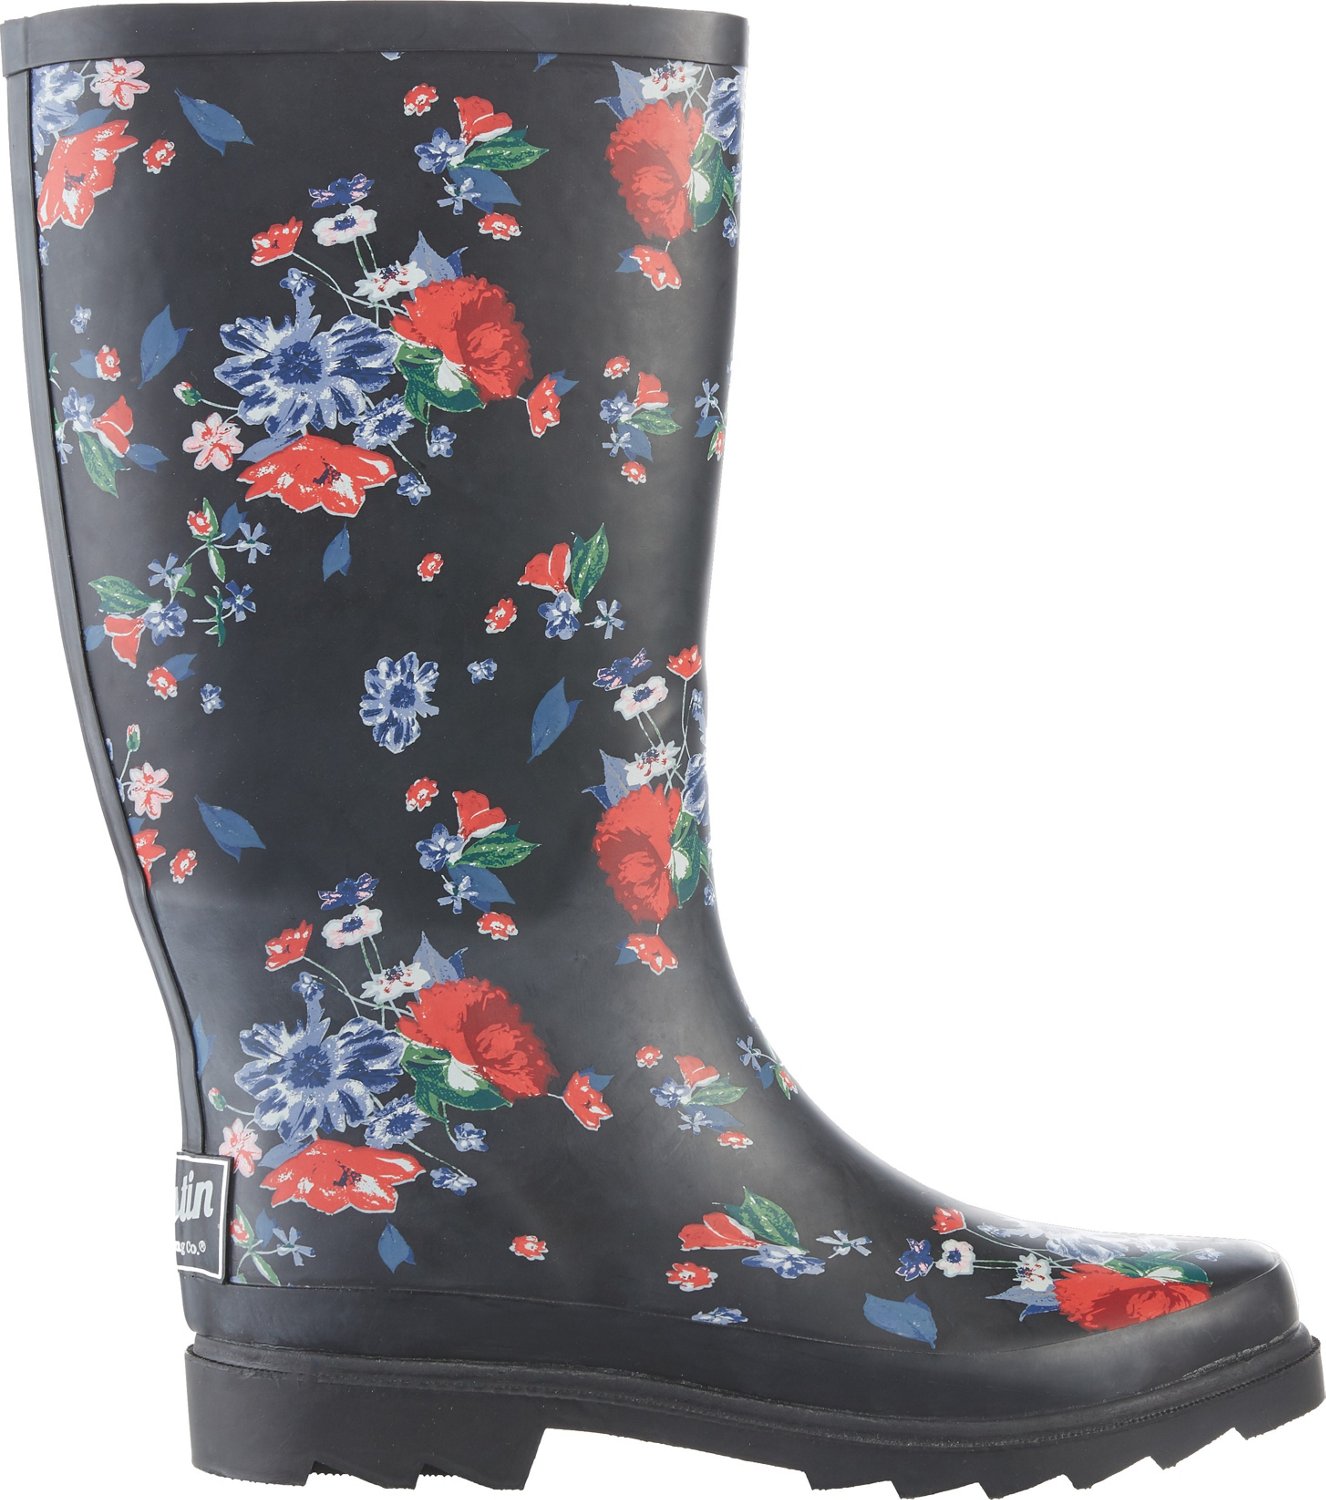 Rubber Rain Boots \u0026 Duck Boots For 